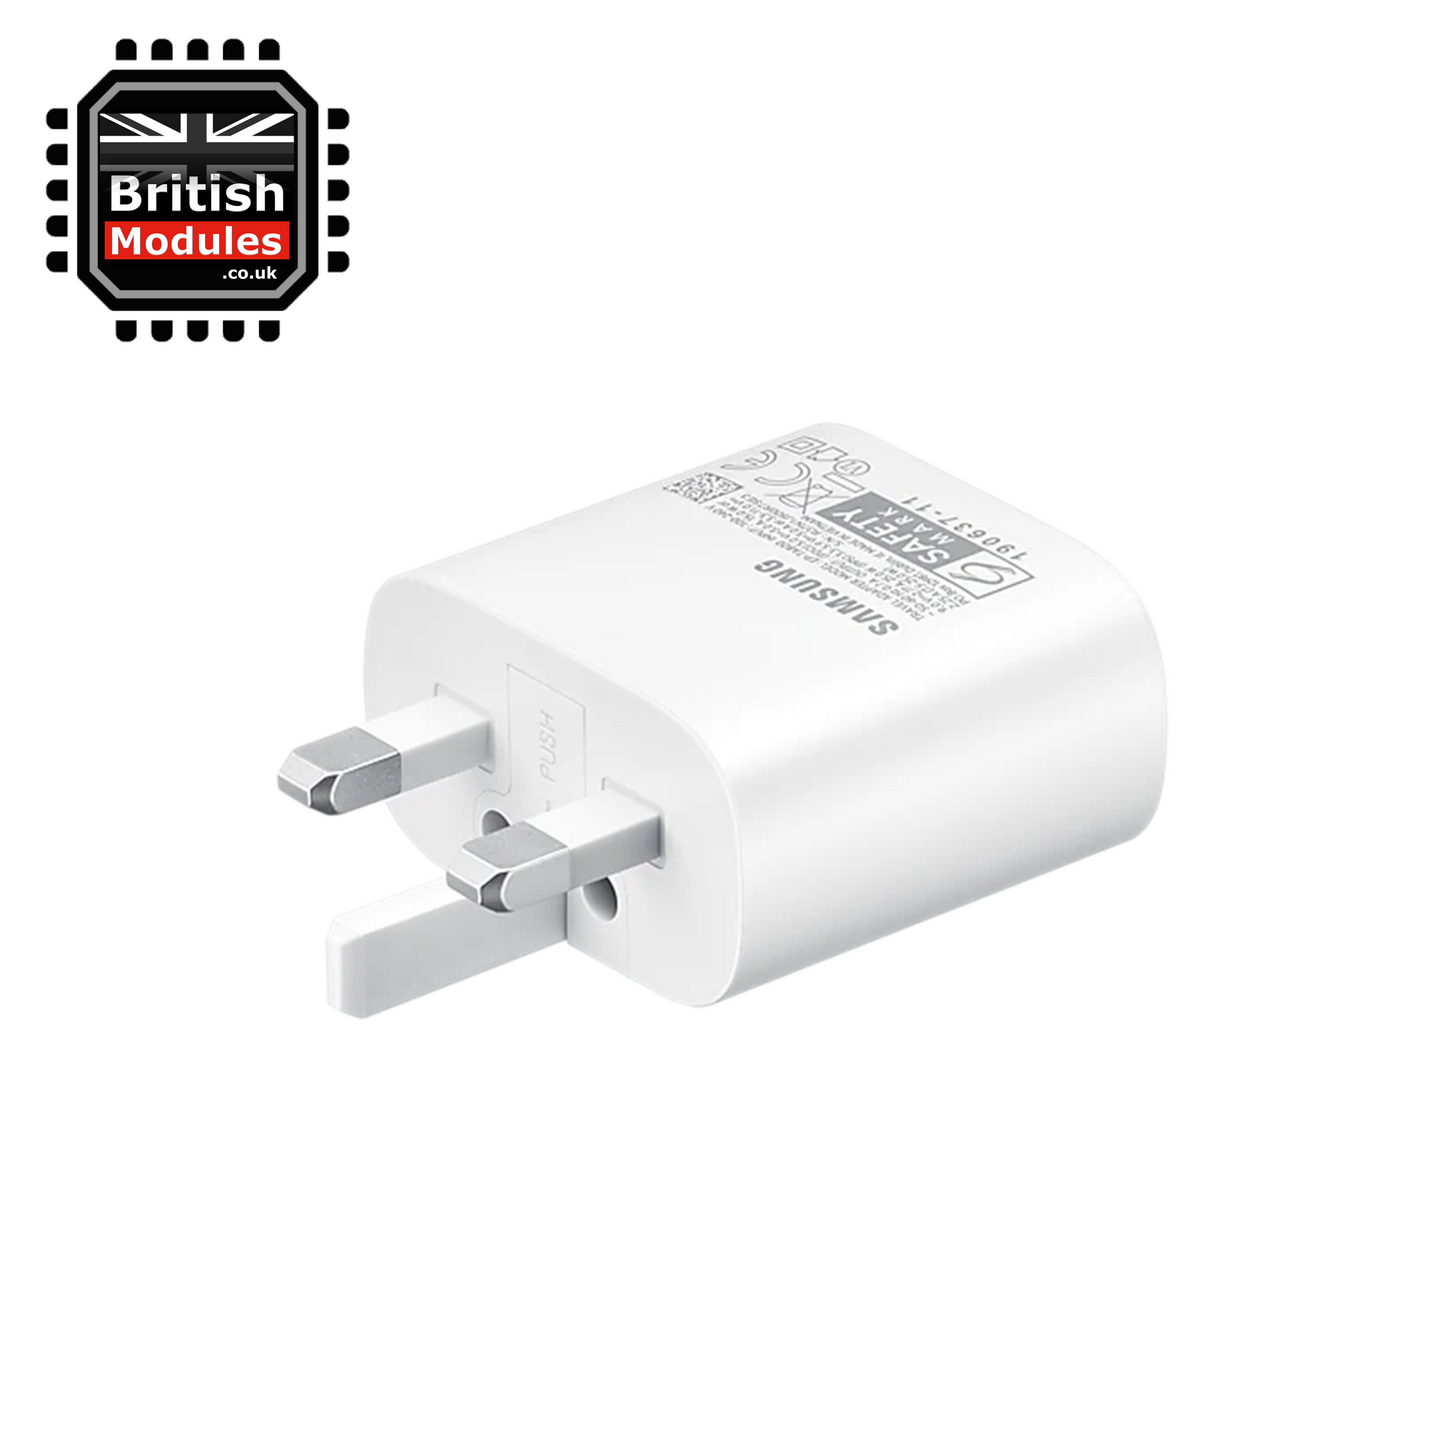 Samsung 25W USB-C PD Super Fast Charging Plug UK Wall Charger White